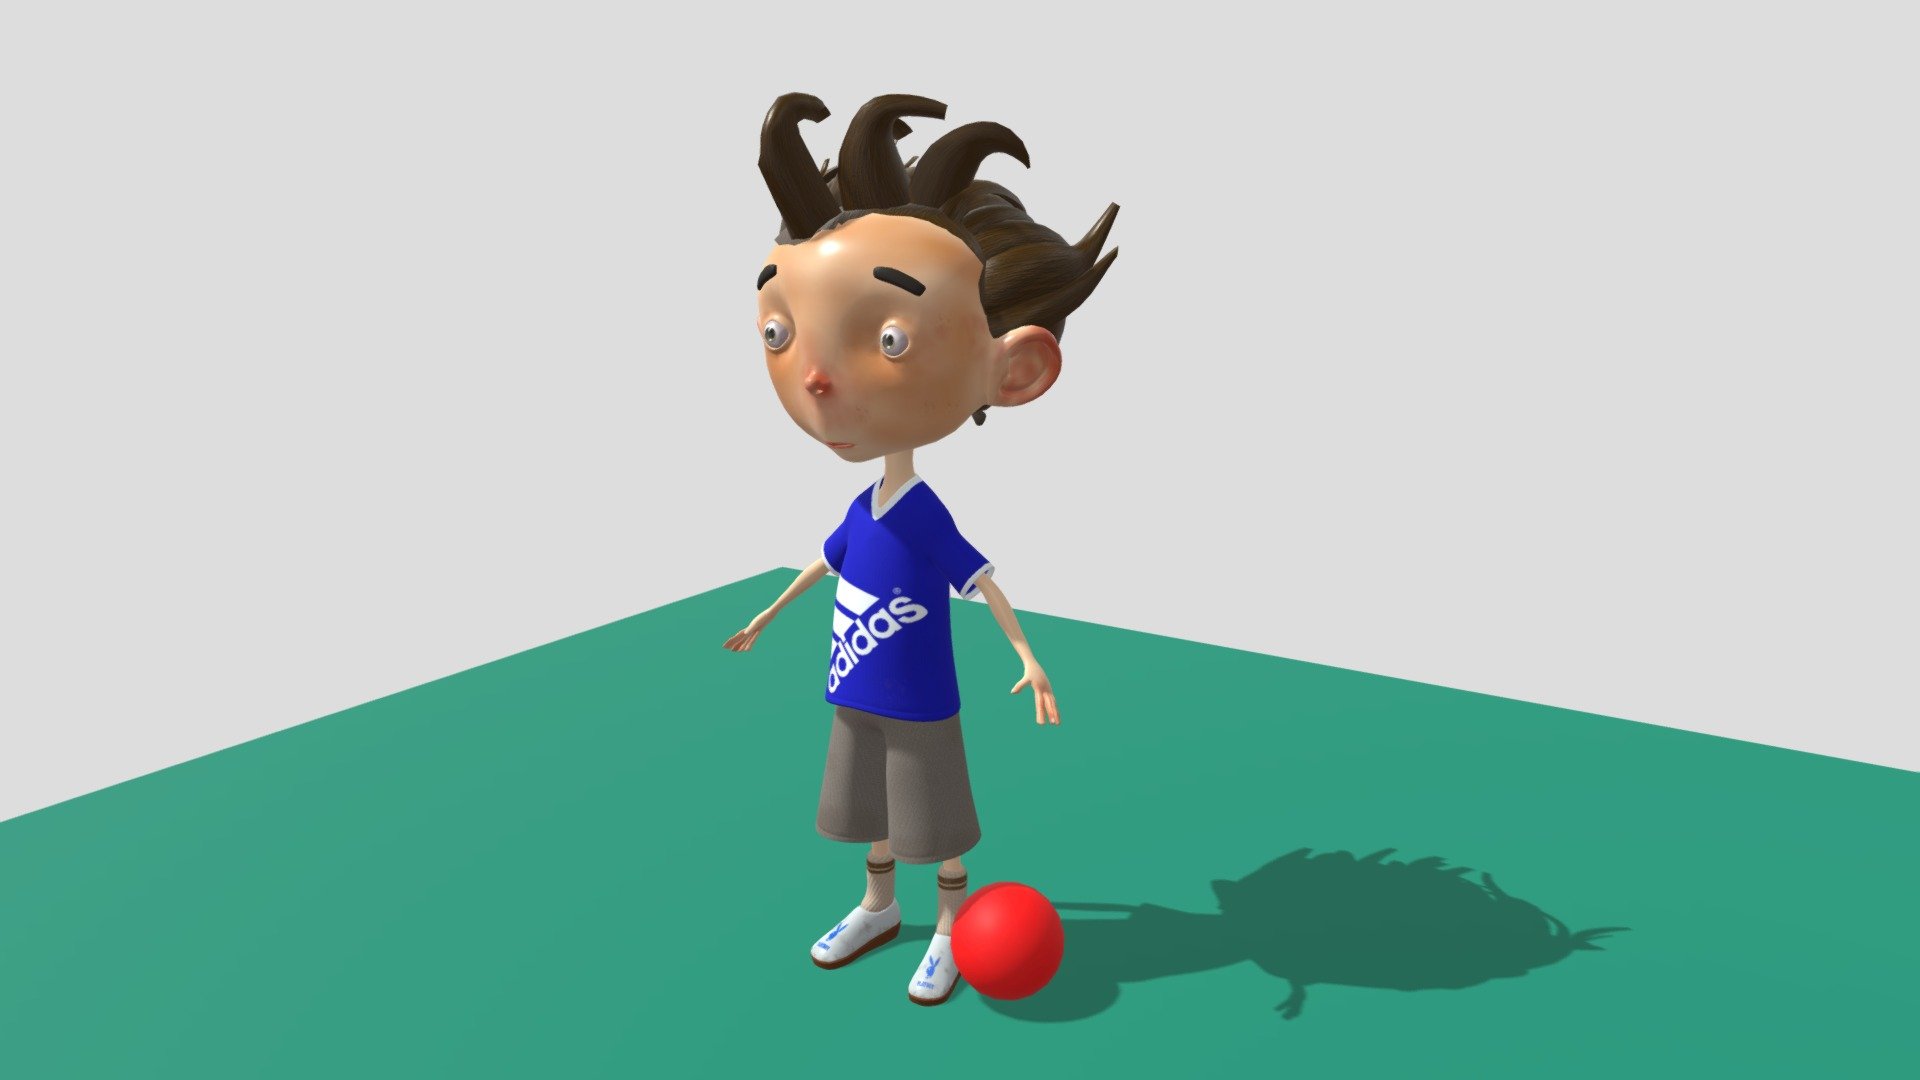 Boy cartoon character With nikker And Tshirt.And Styles socks and shoes 3d model